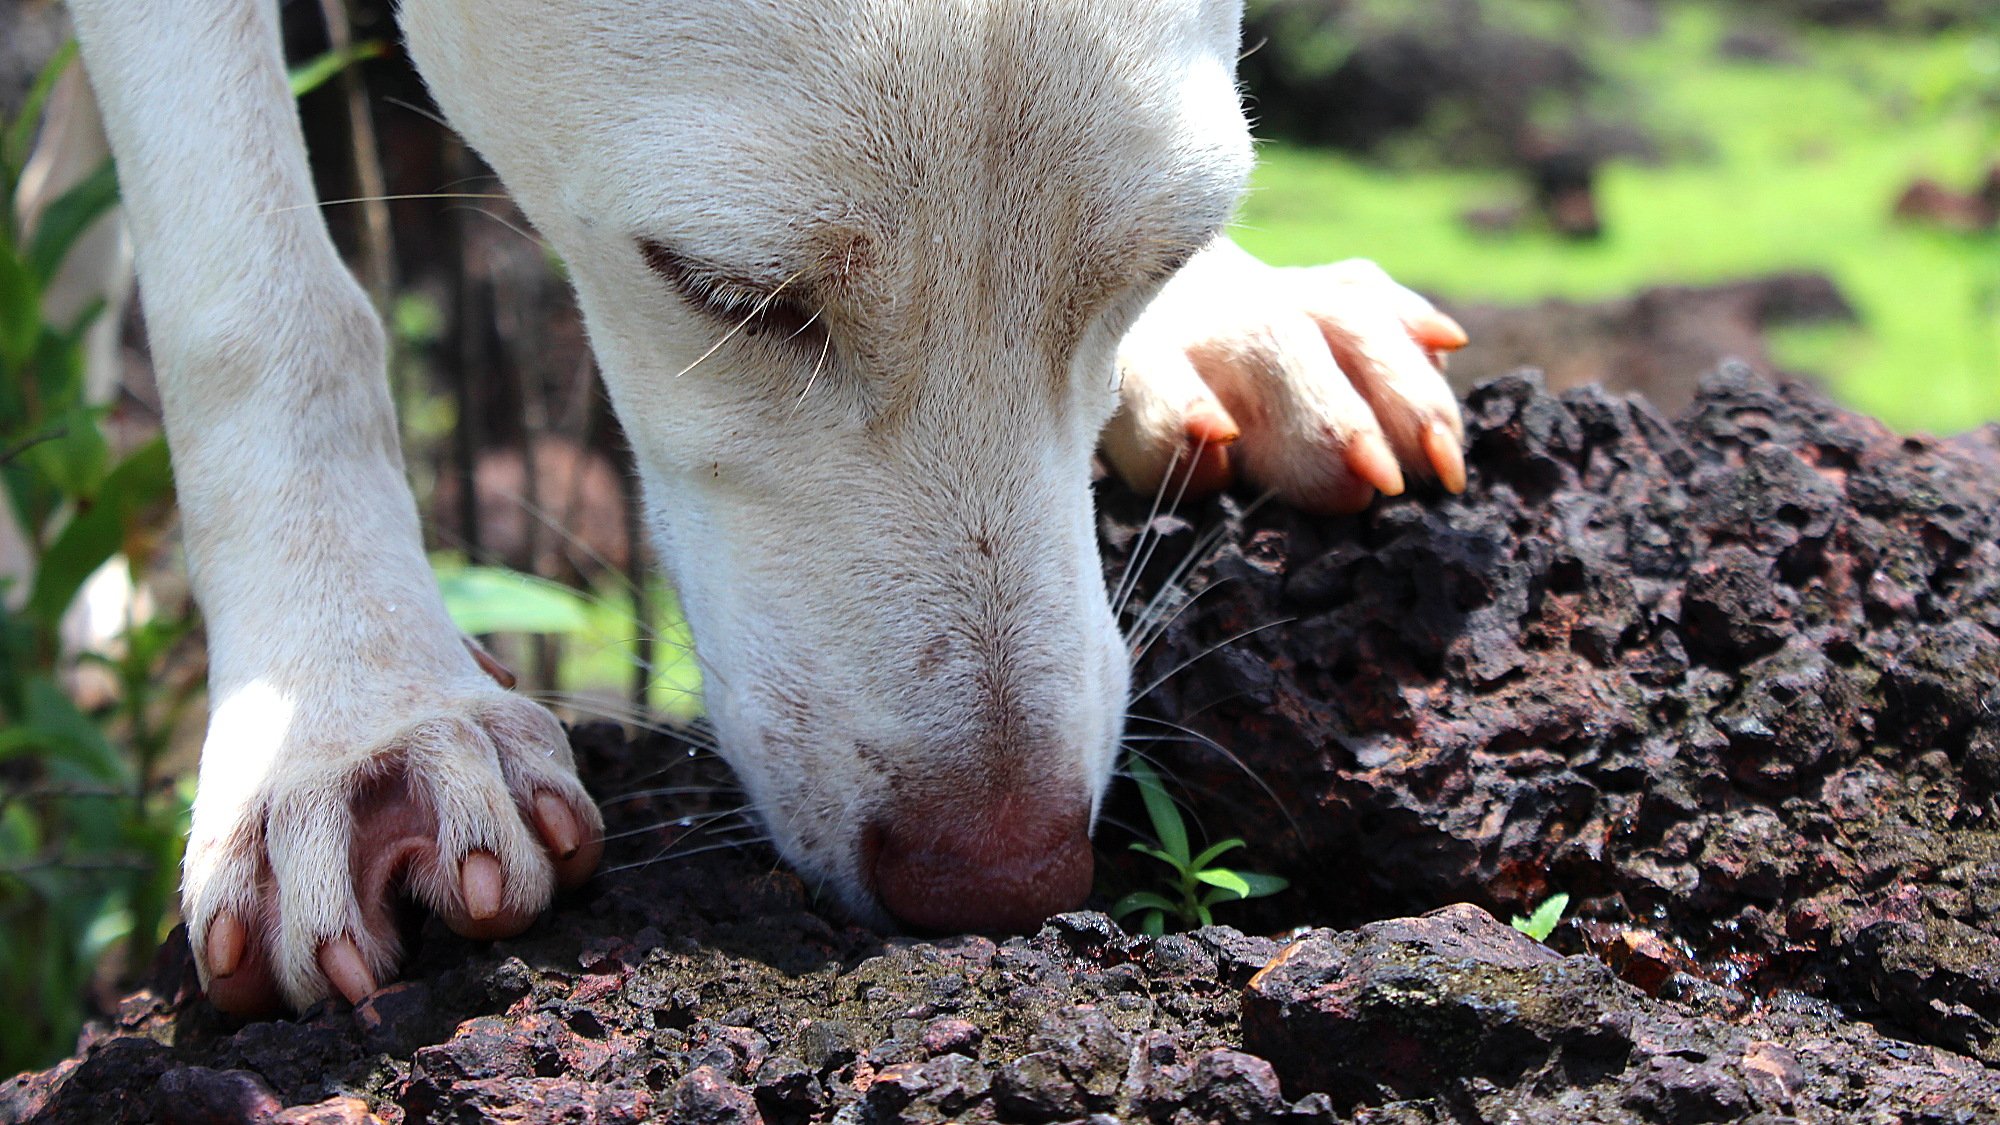 A close-up of a white stray dog drinking water from a small bowlon a rock.